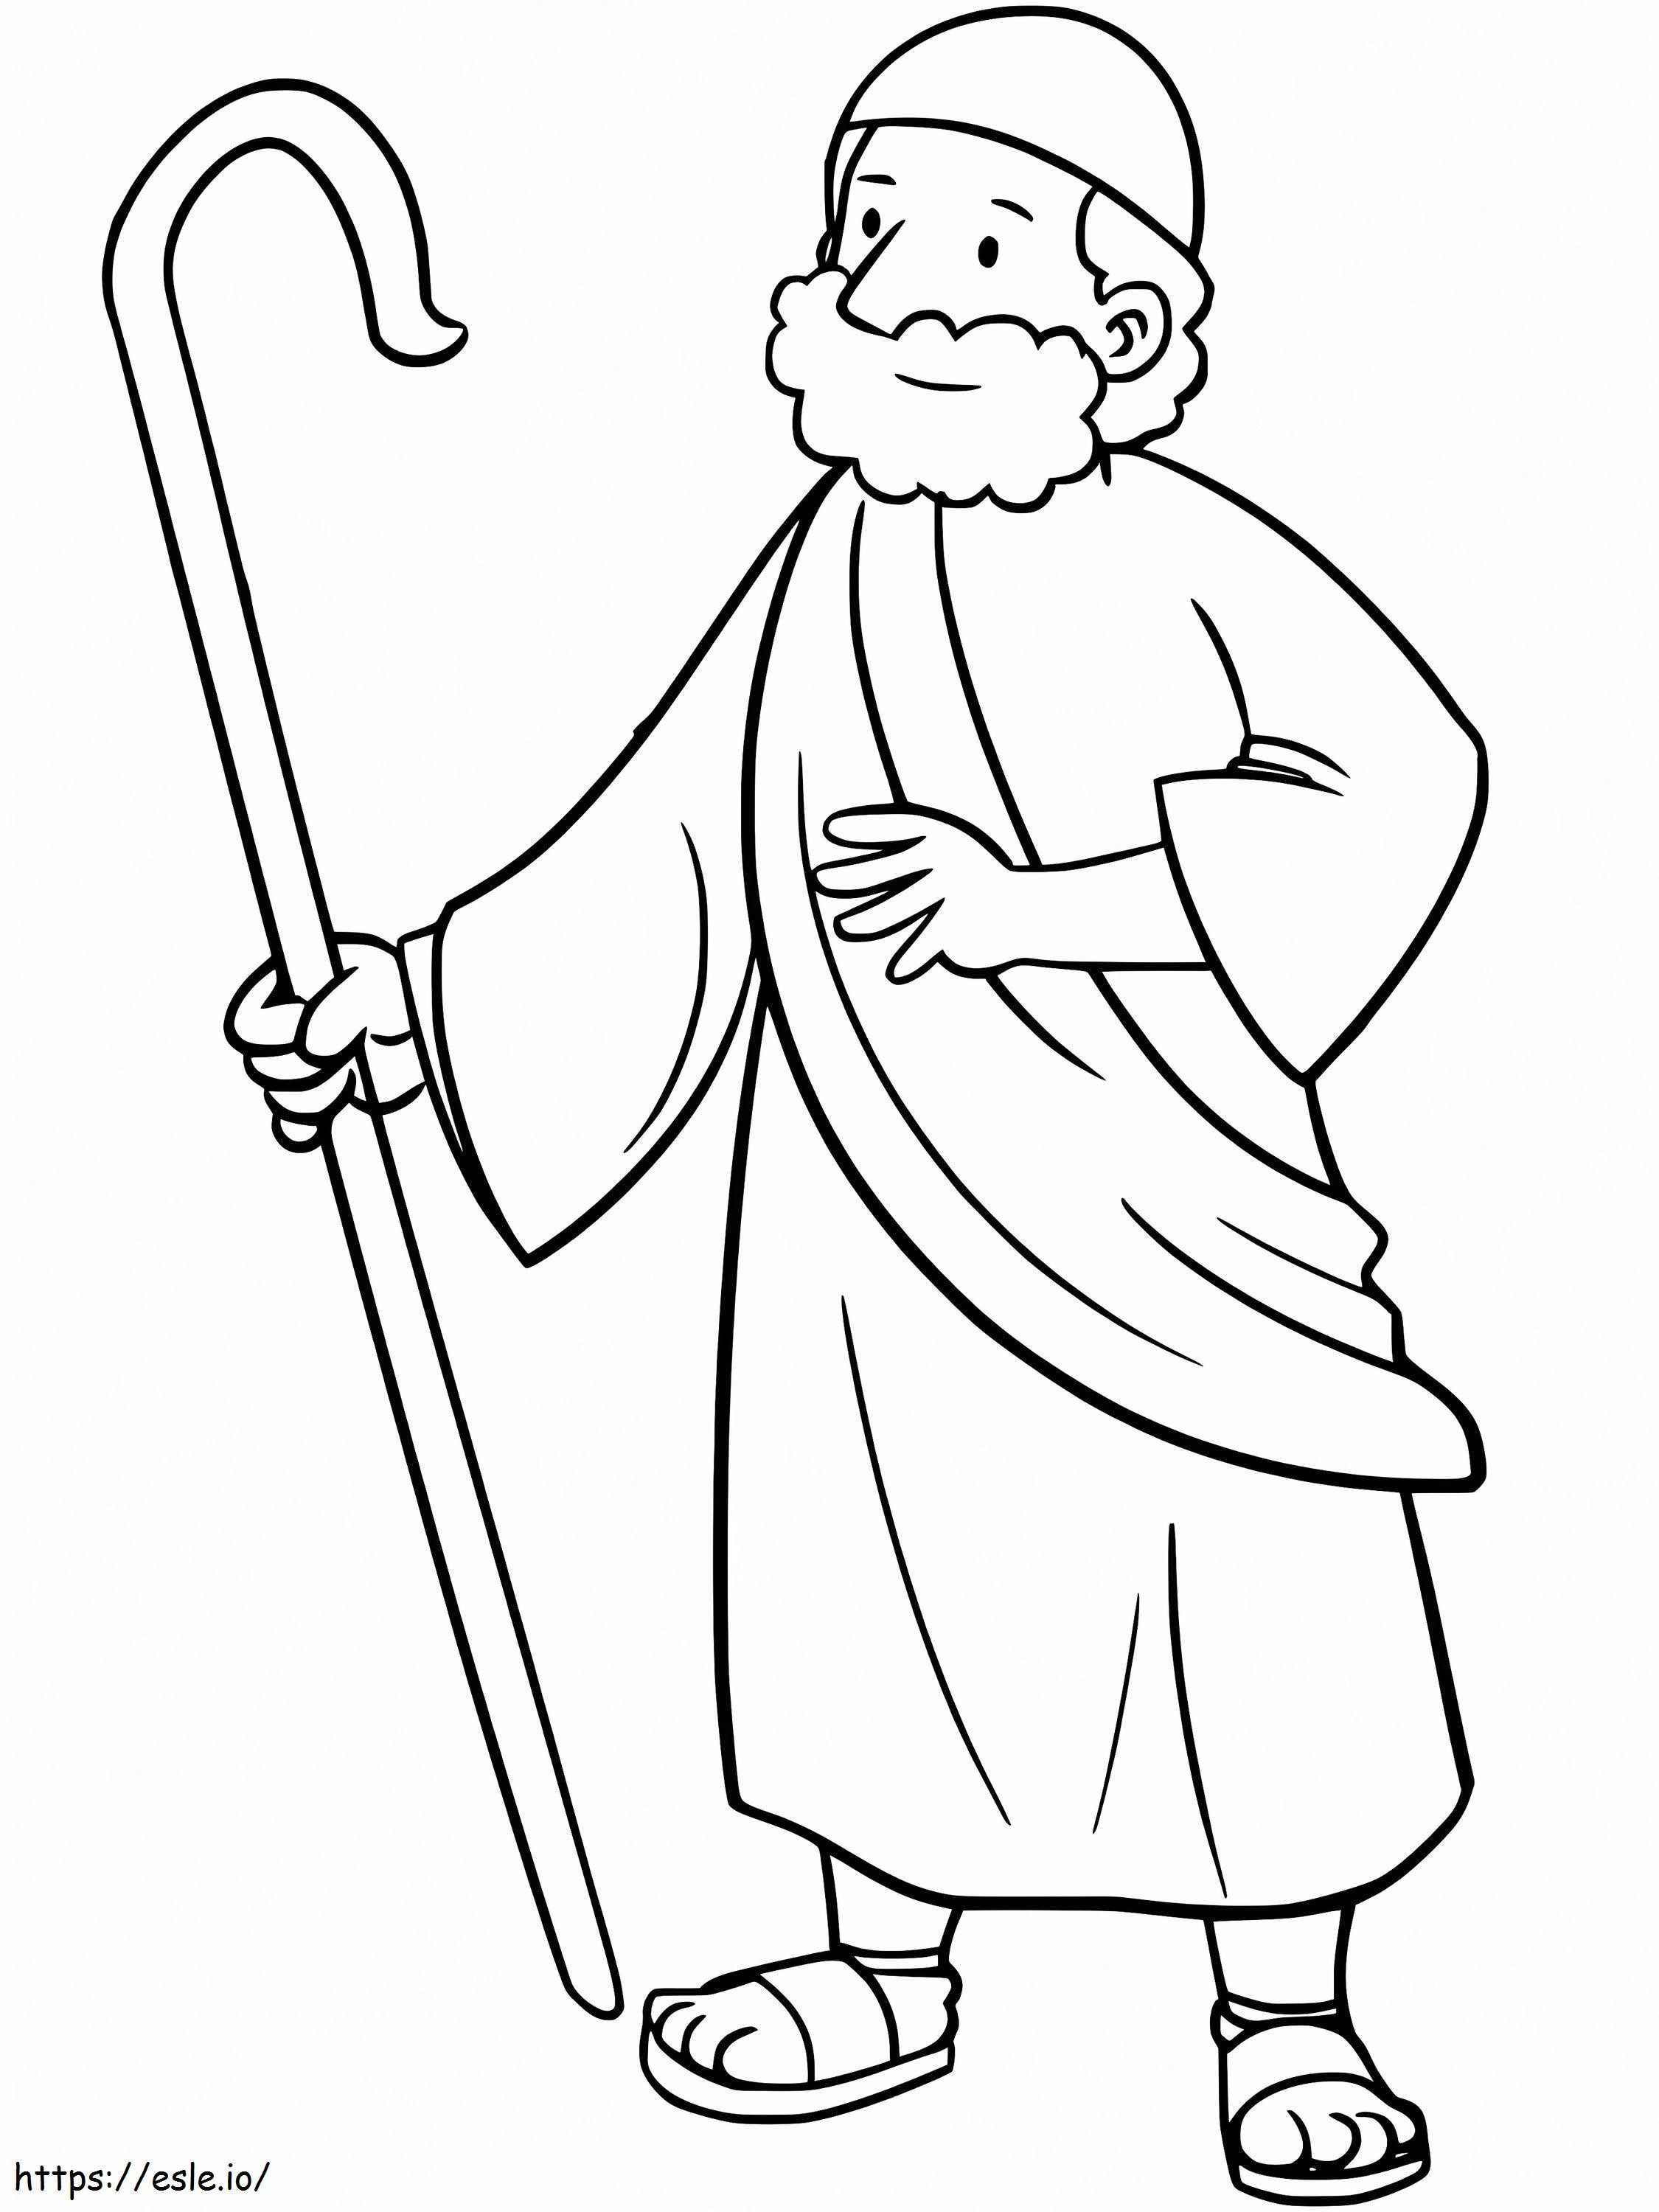 Printable Moses coloring page